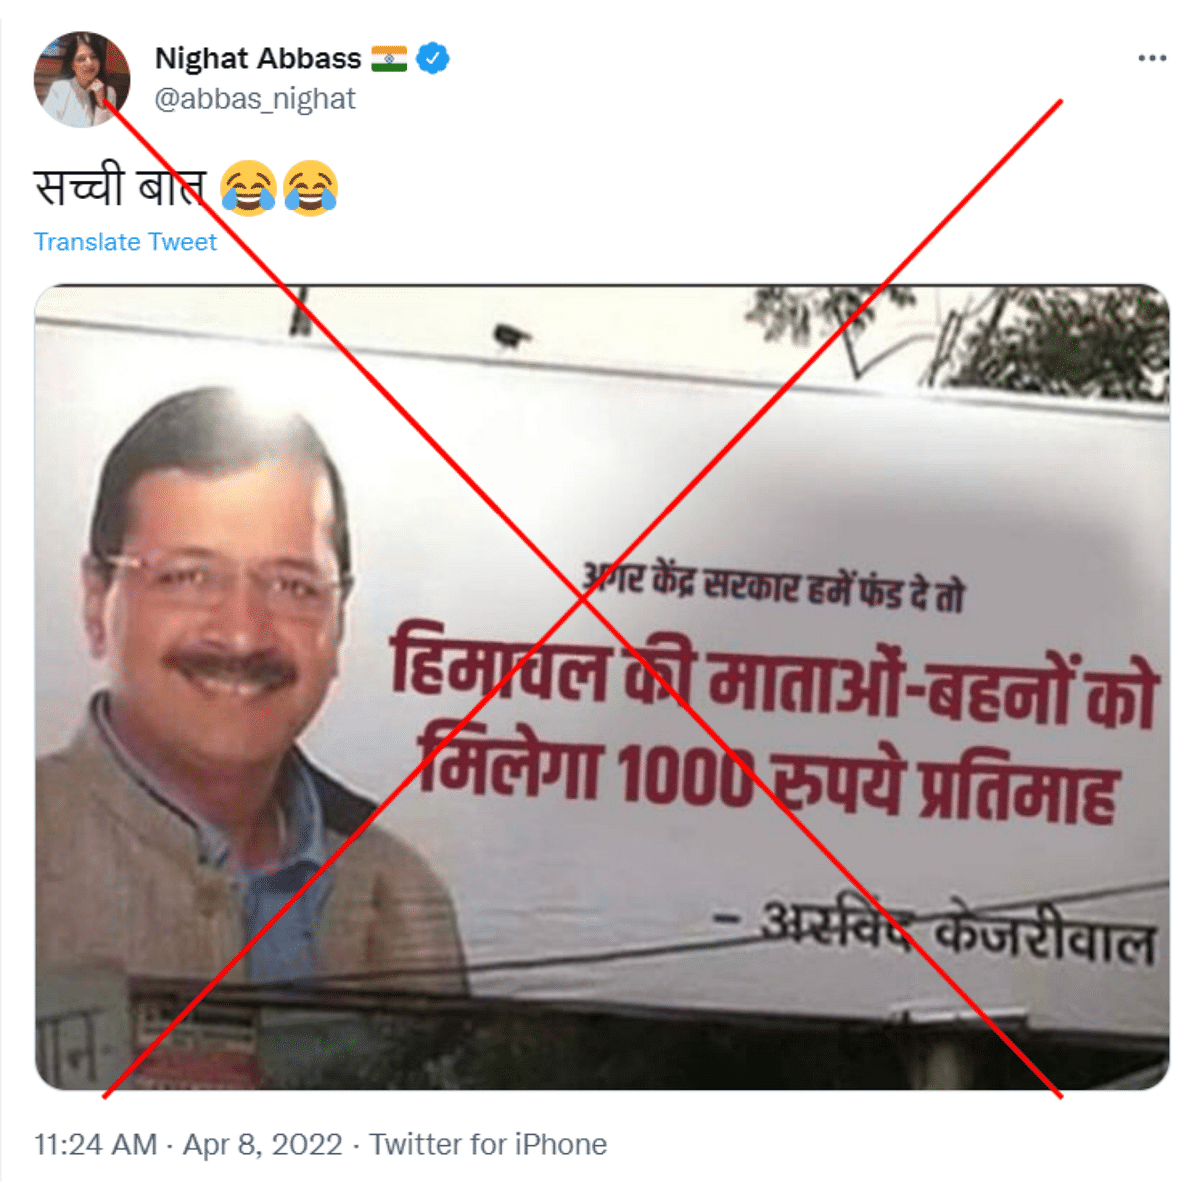 The original image dates back to 2015 wherein Kejriwal was thanking the people of Delhi after winning the election.